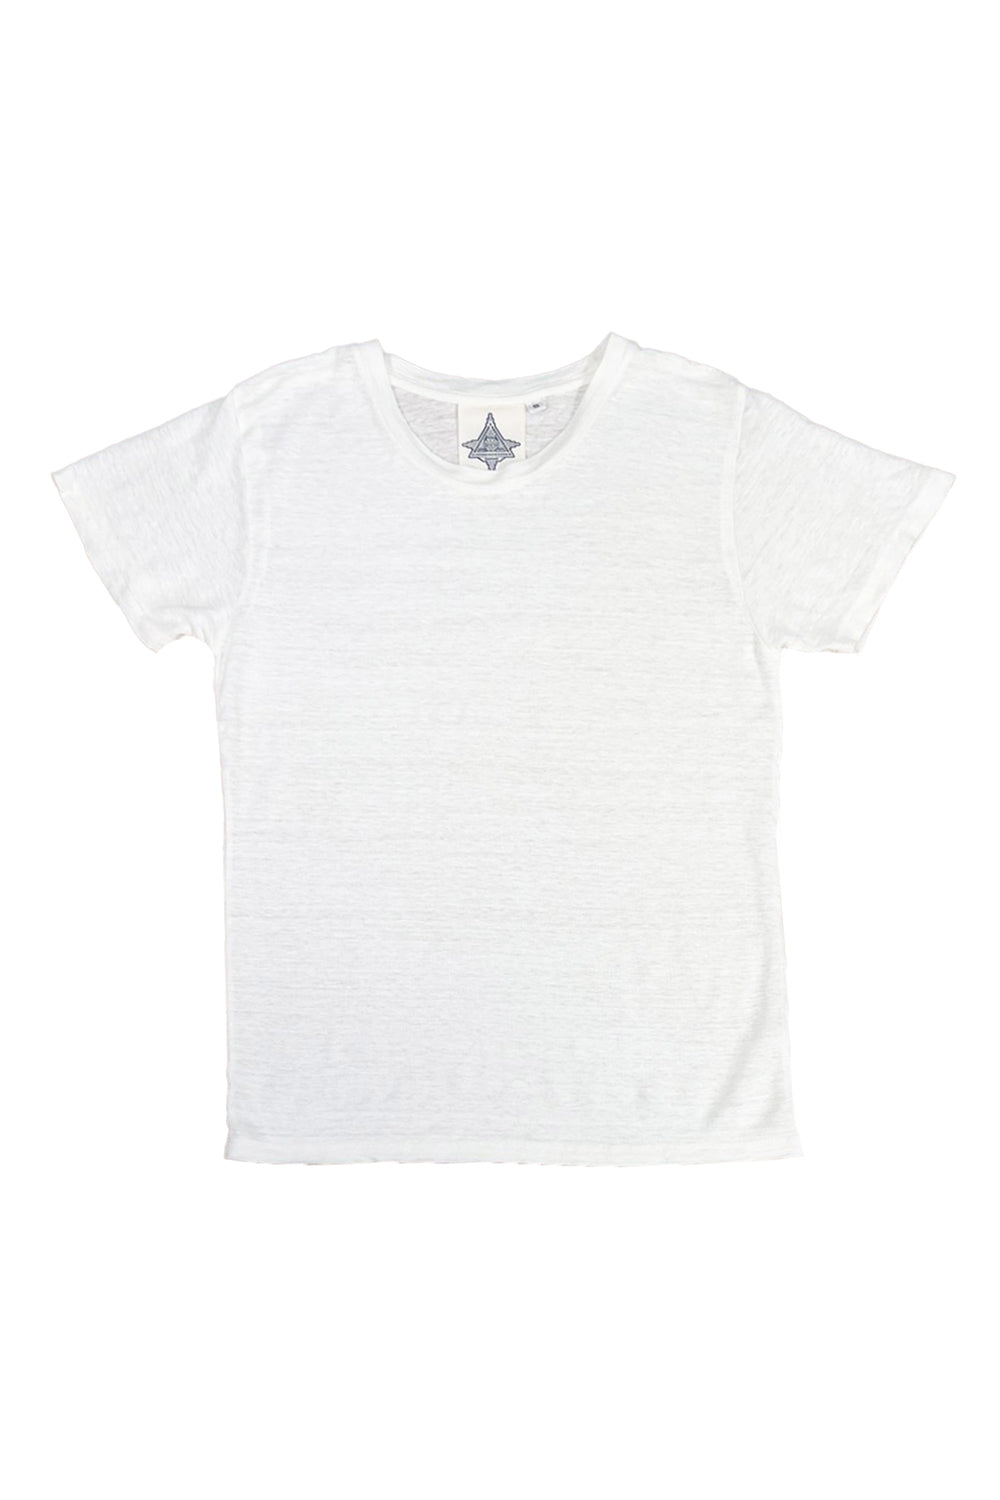 Madison 100% Hemp Tee | Jungmaven Hemp Clothing & Accessories / Color: Washed White